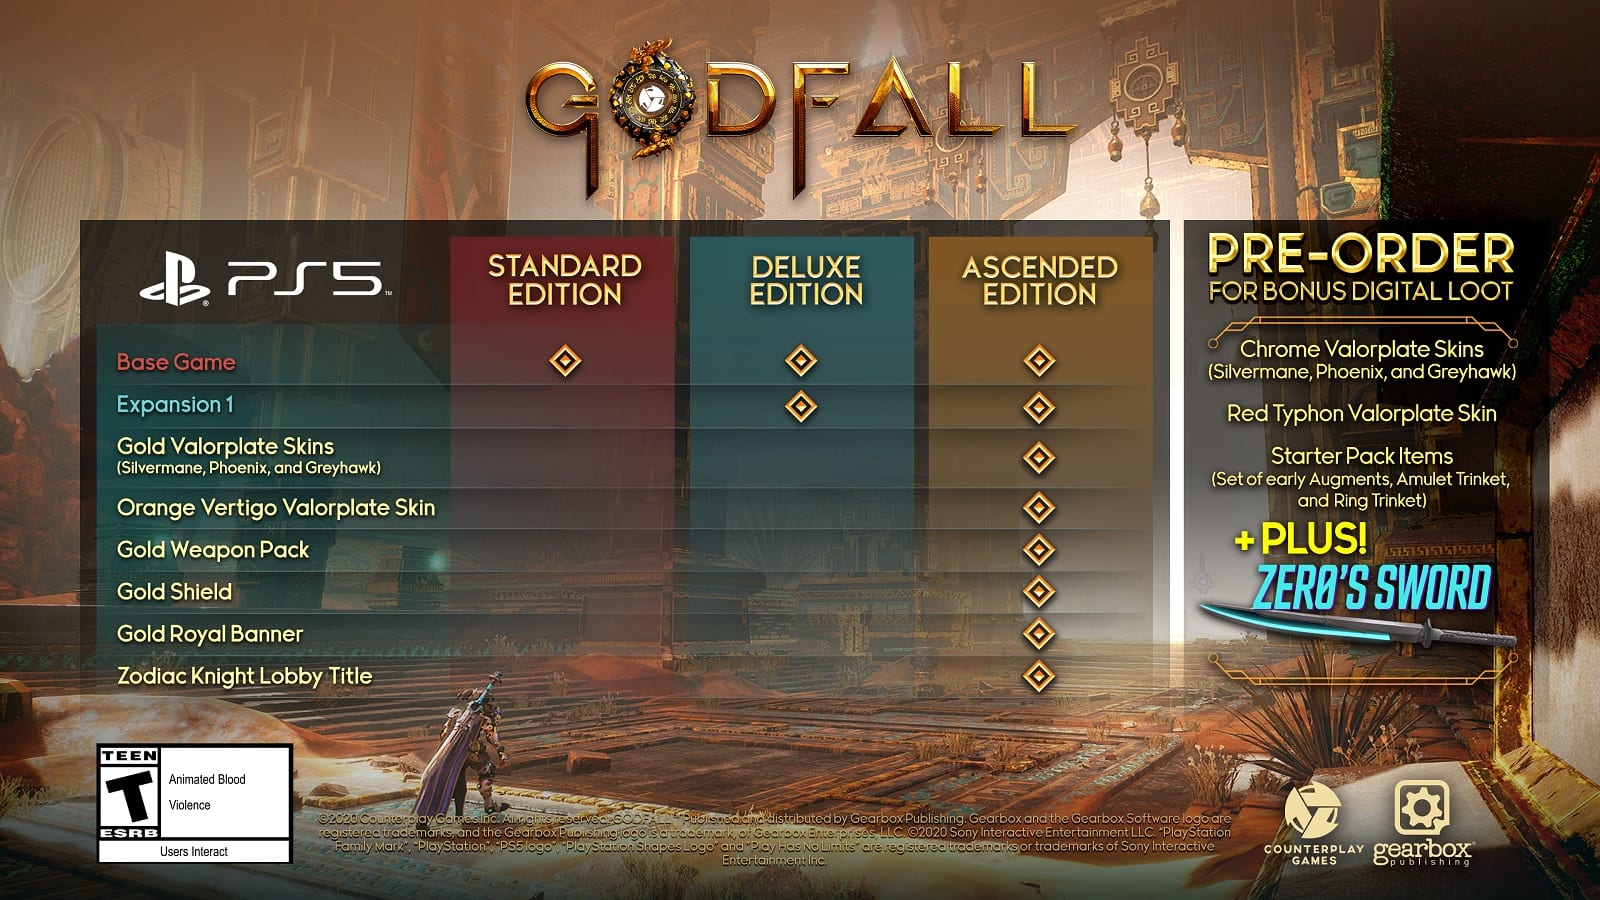 Godfall, Gearbox, PlayStation 5, (Physical Edition)